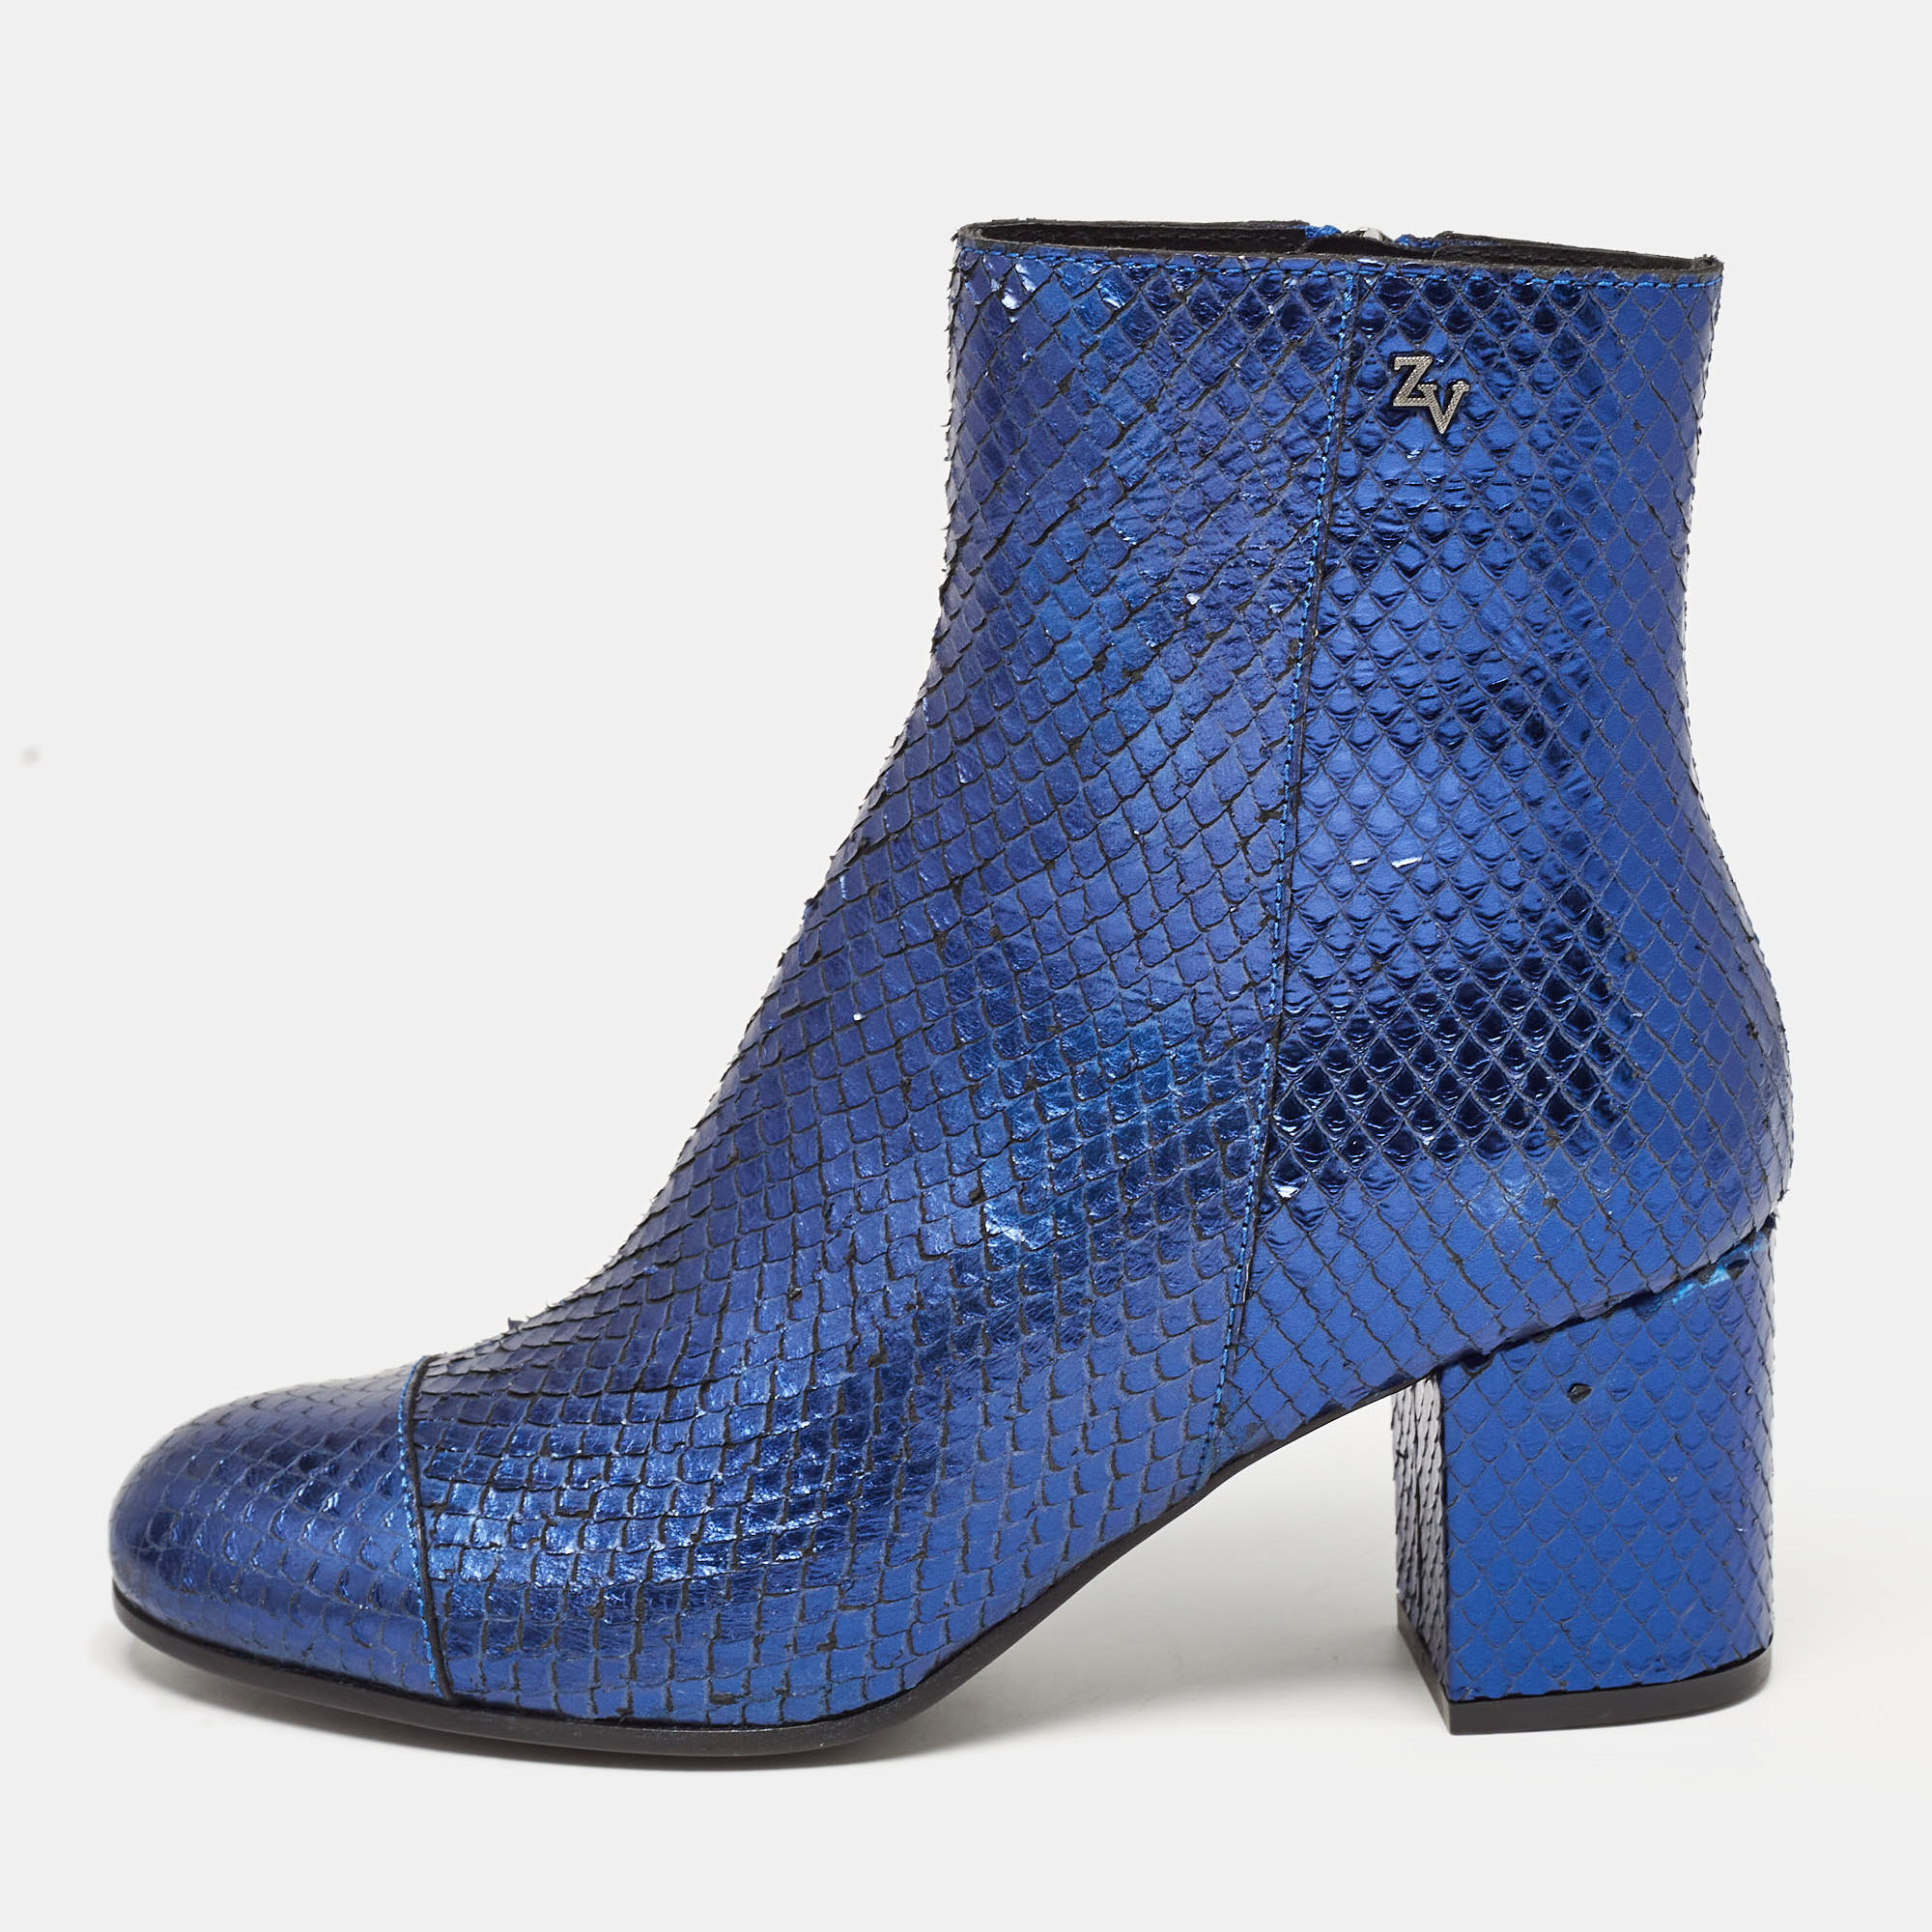 Pre-owned Zadig & Voltaire Metallic Blue Snakeskin Embossed Leather Zip Ankle Boots Size 36